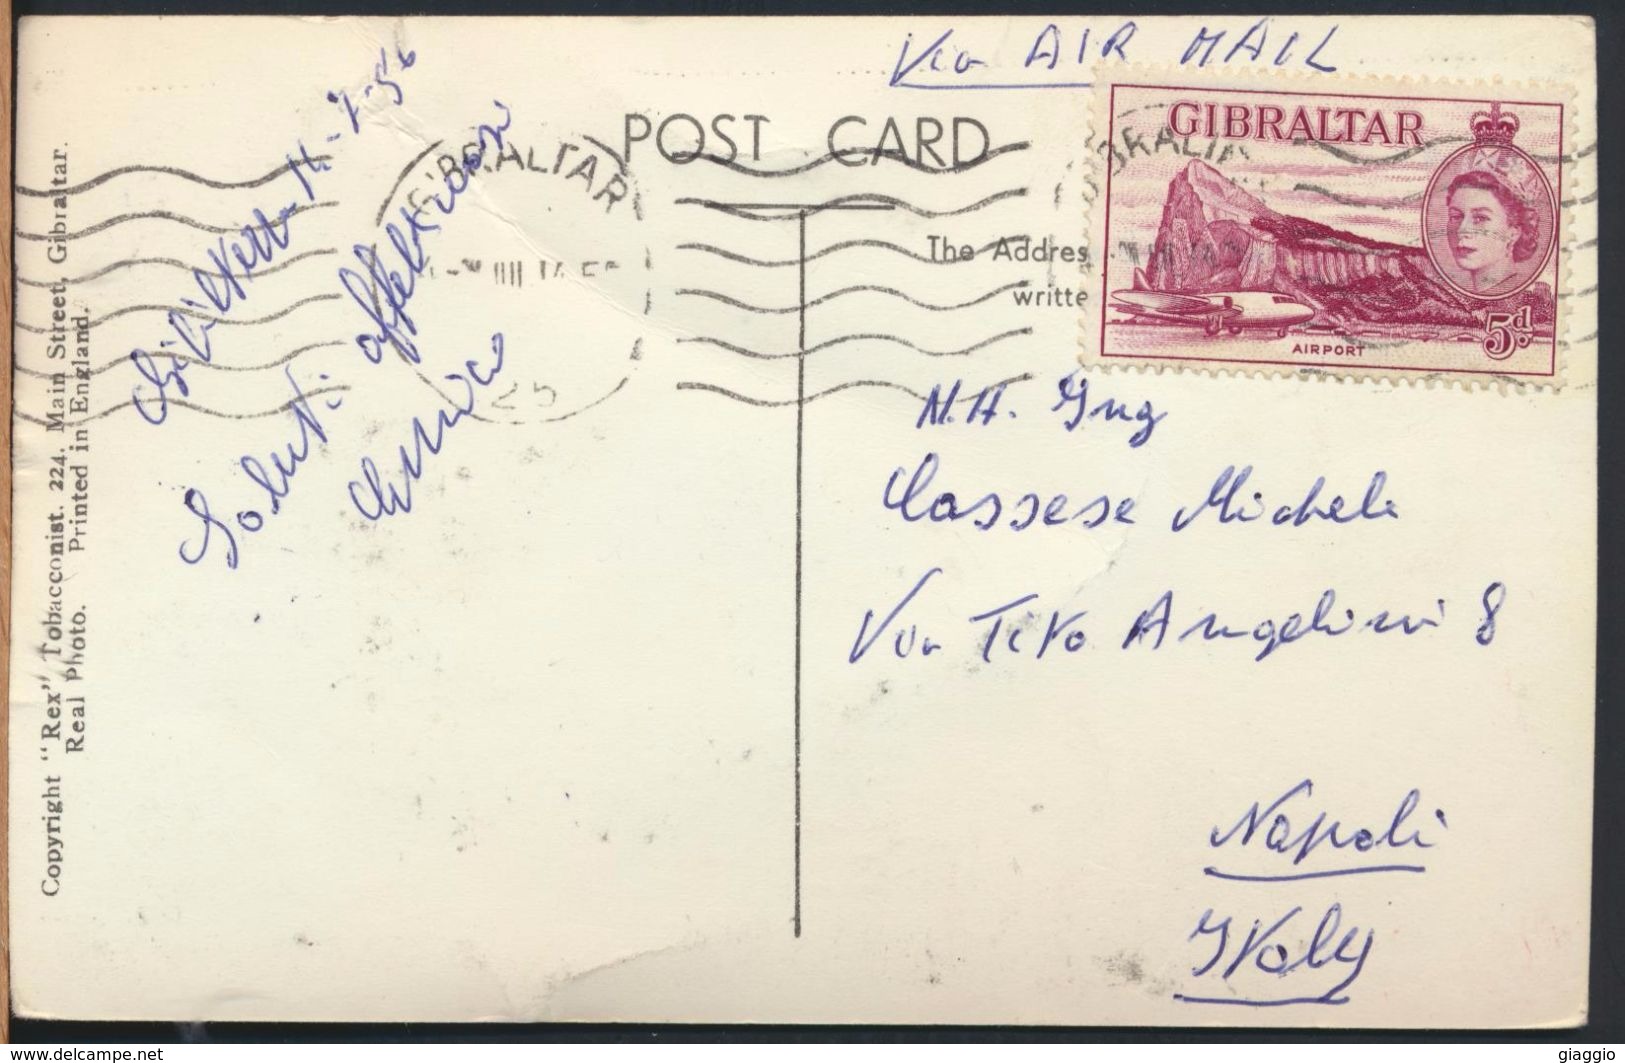 °°° 6339 - GIBRALTAR - THE ROCK FROM THE STRAITS - 1956 With Stamps °°° - Gibilterra